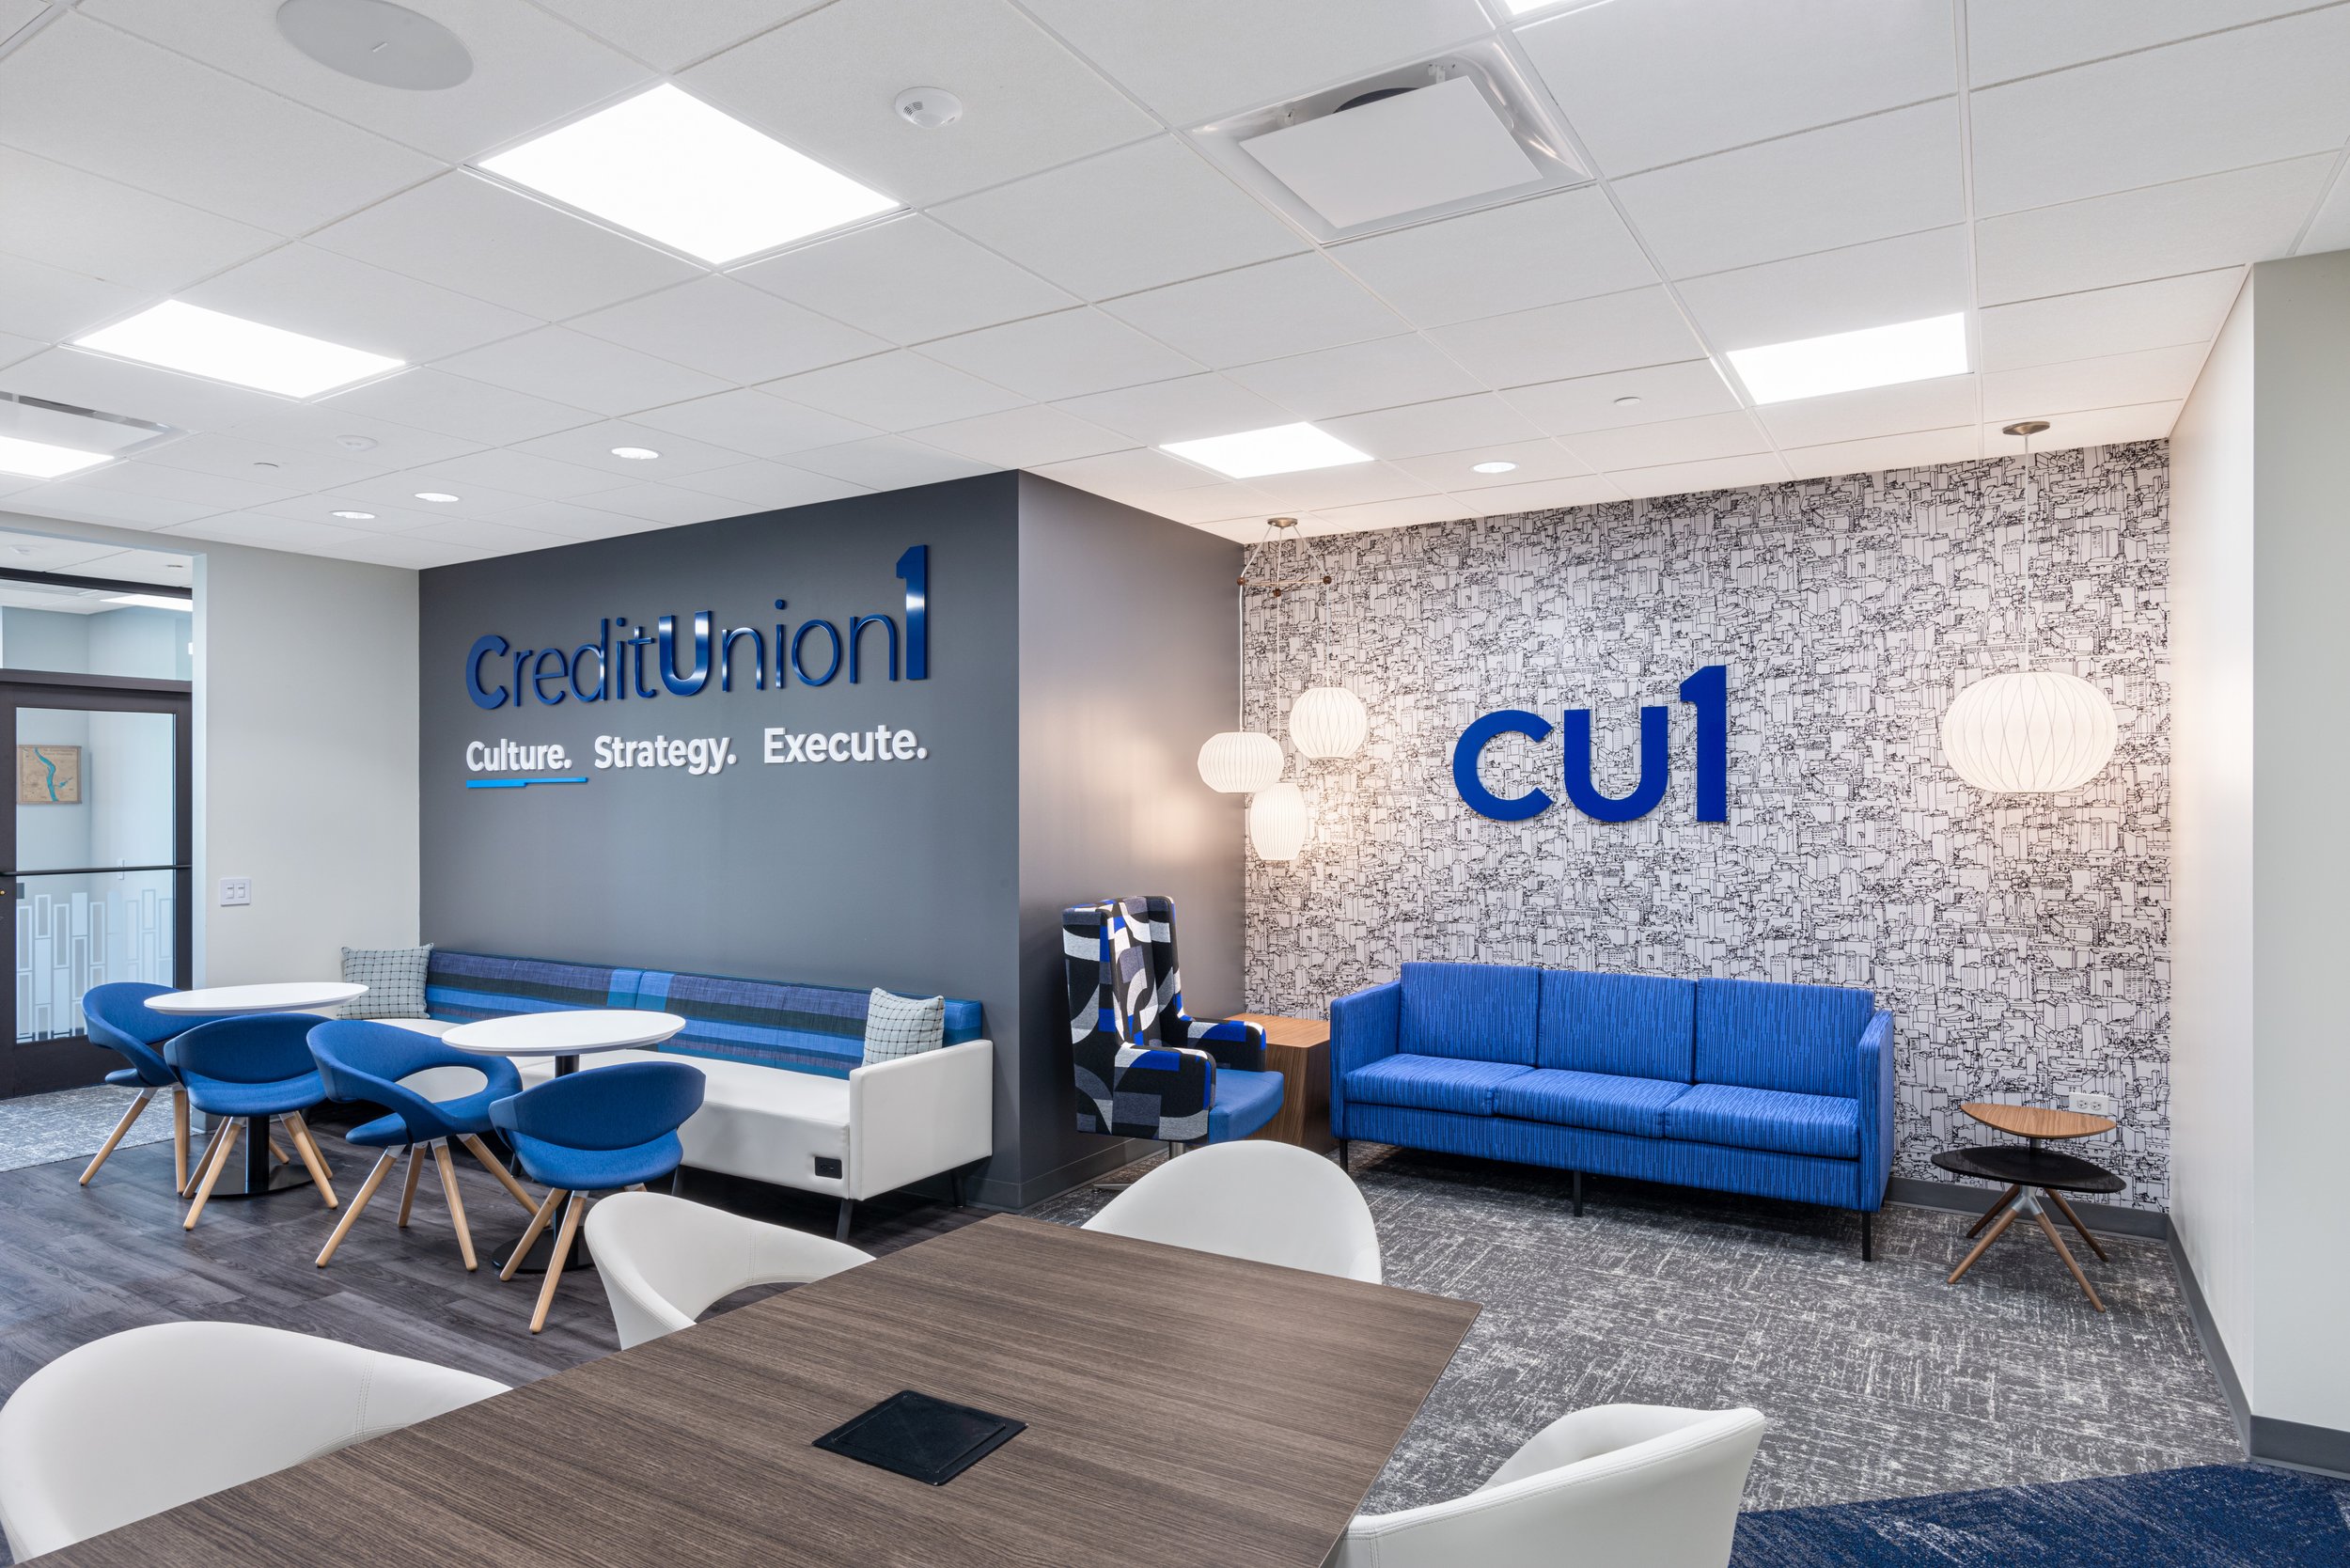 Interior photography of the reception room at the Credit Union offices in Illinois.